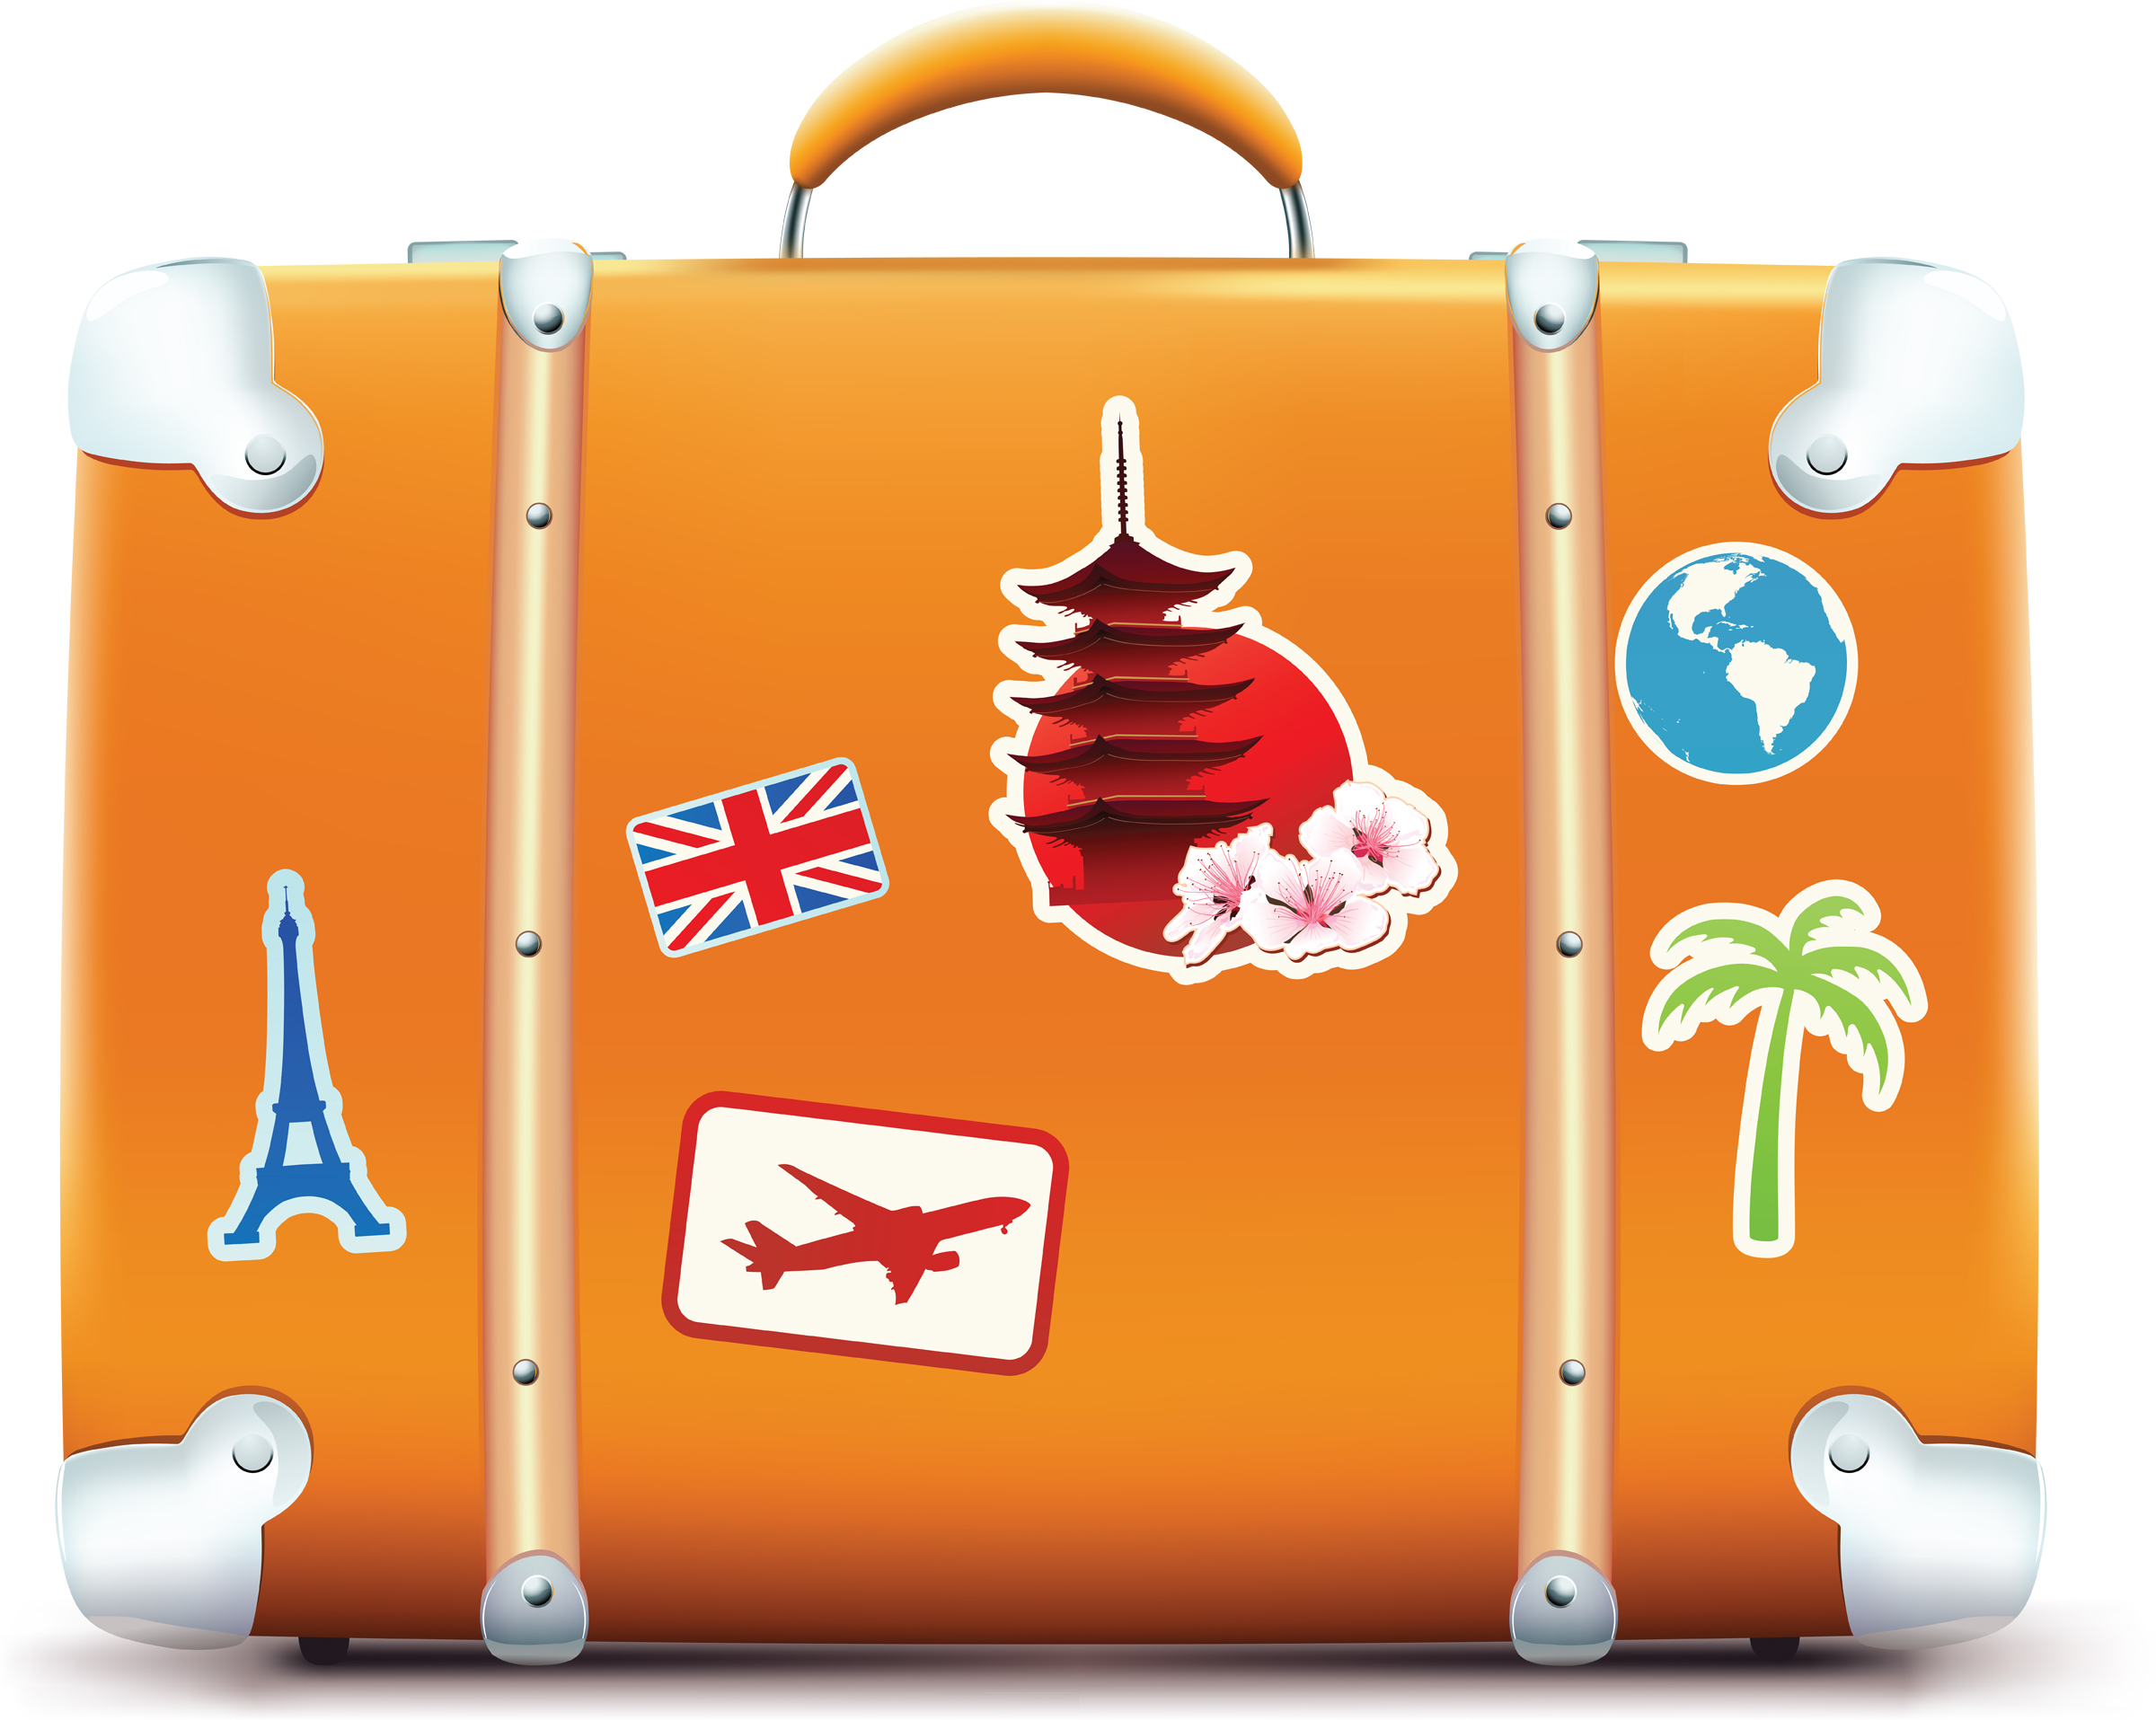 Travel Suitcase Stickers A Suitcase With Travel